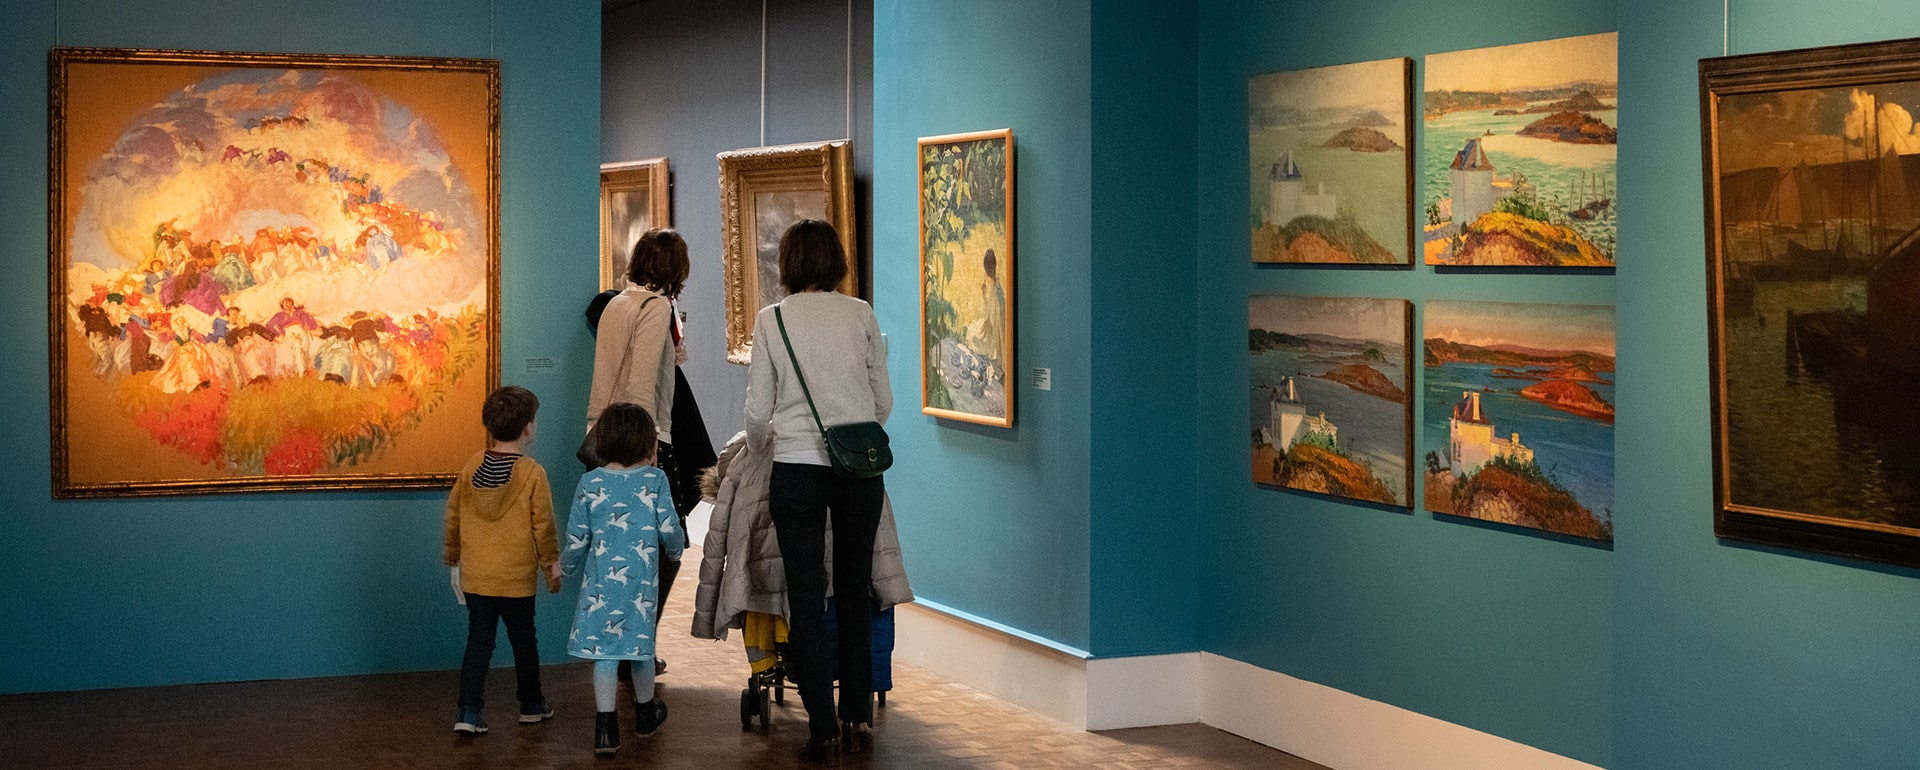 Spend an afternoon with the family at Brest's Musée des Beaux-Arts